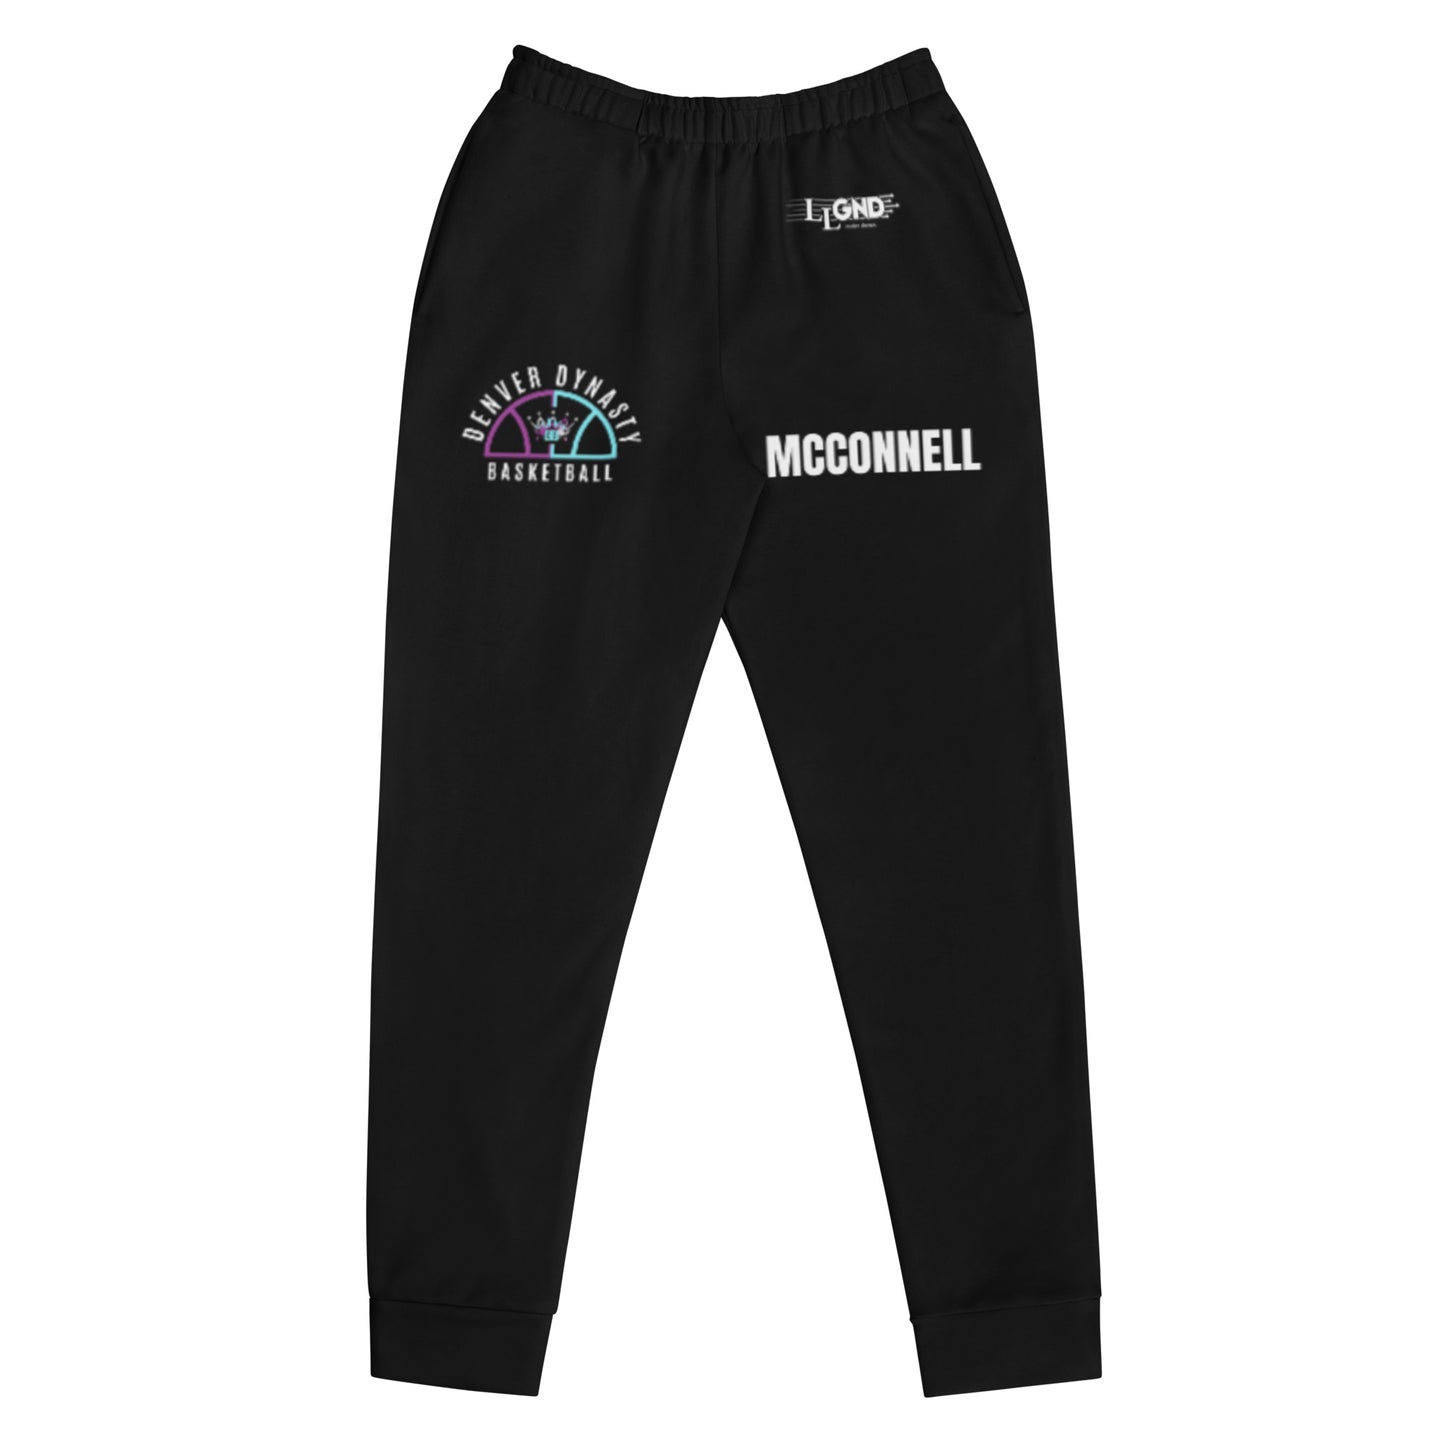 DYNASTY TEAM PANTS (MCCONNELL)